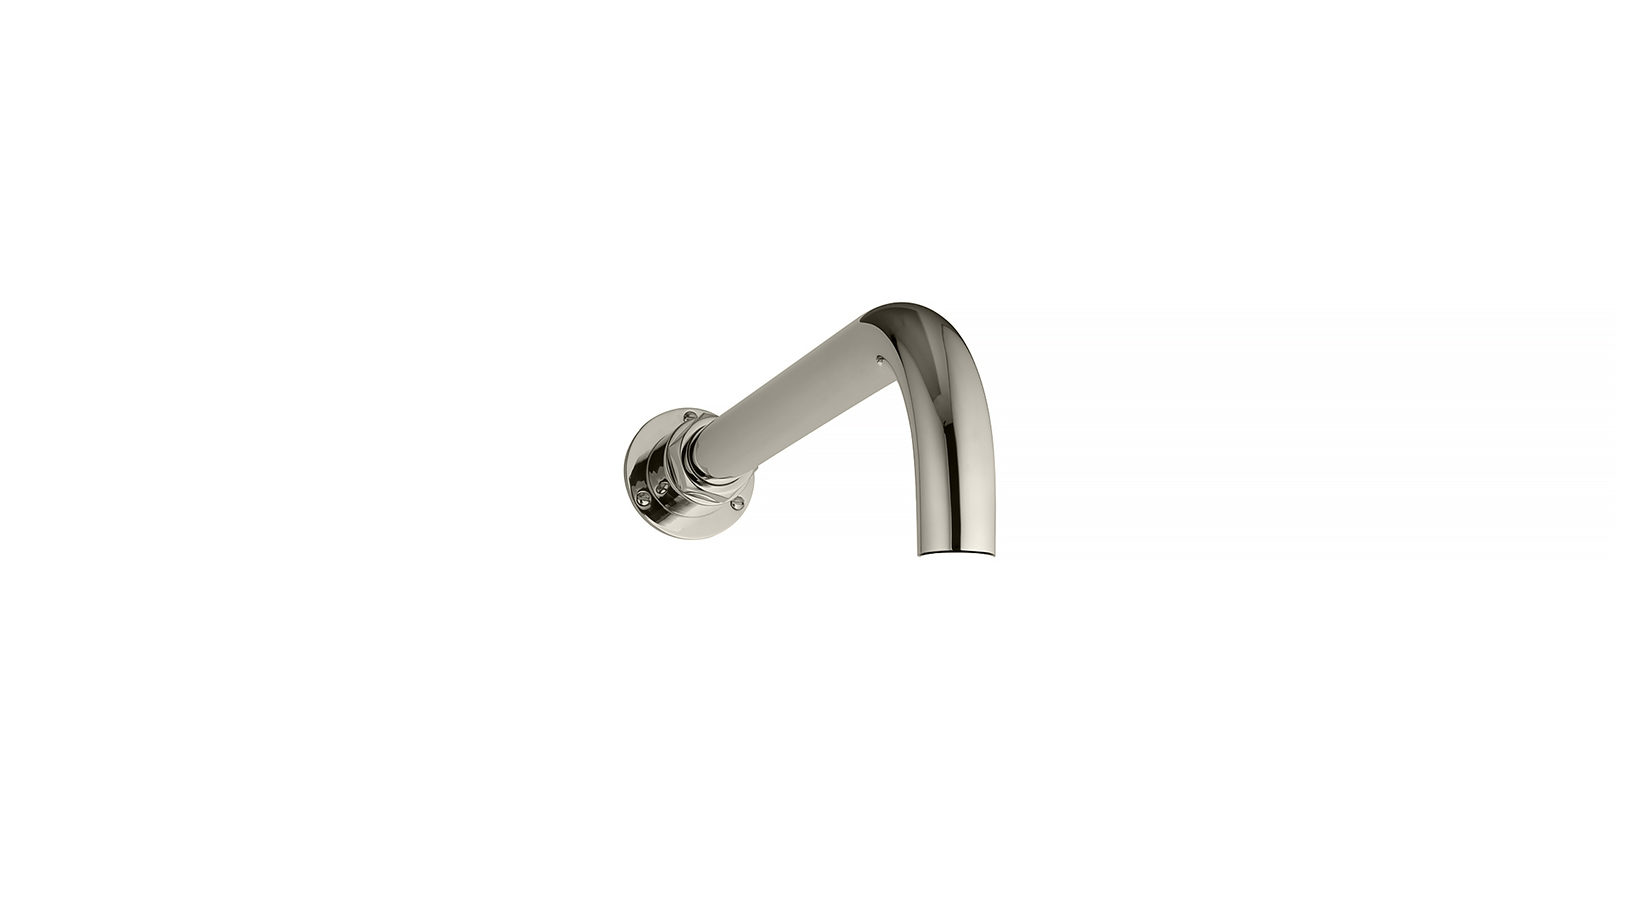 The Grand Wall Mounted Shower Arm